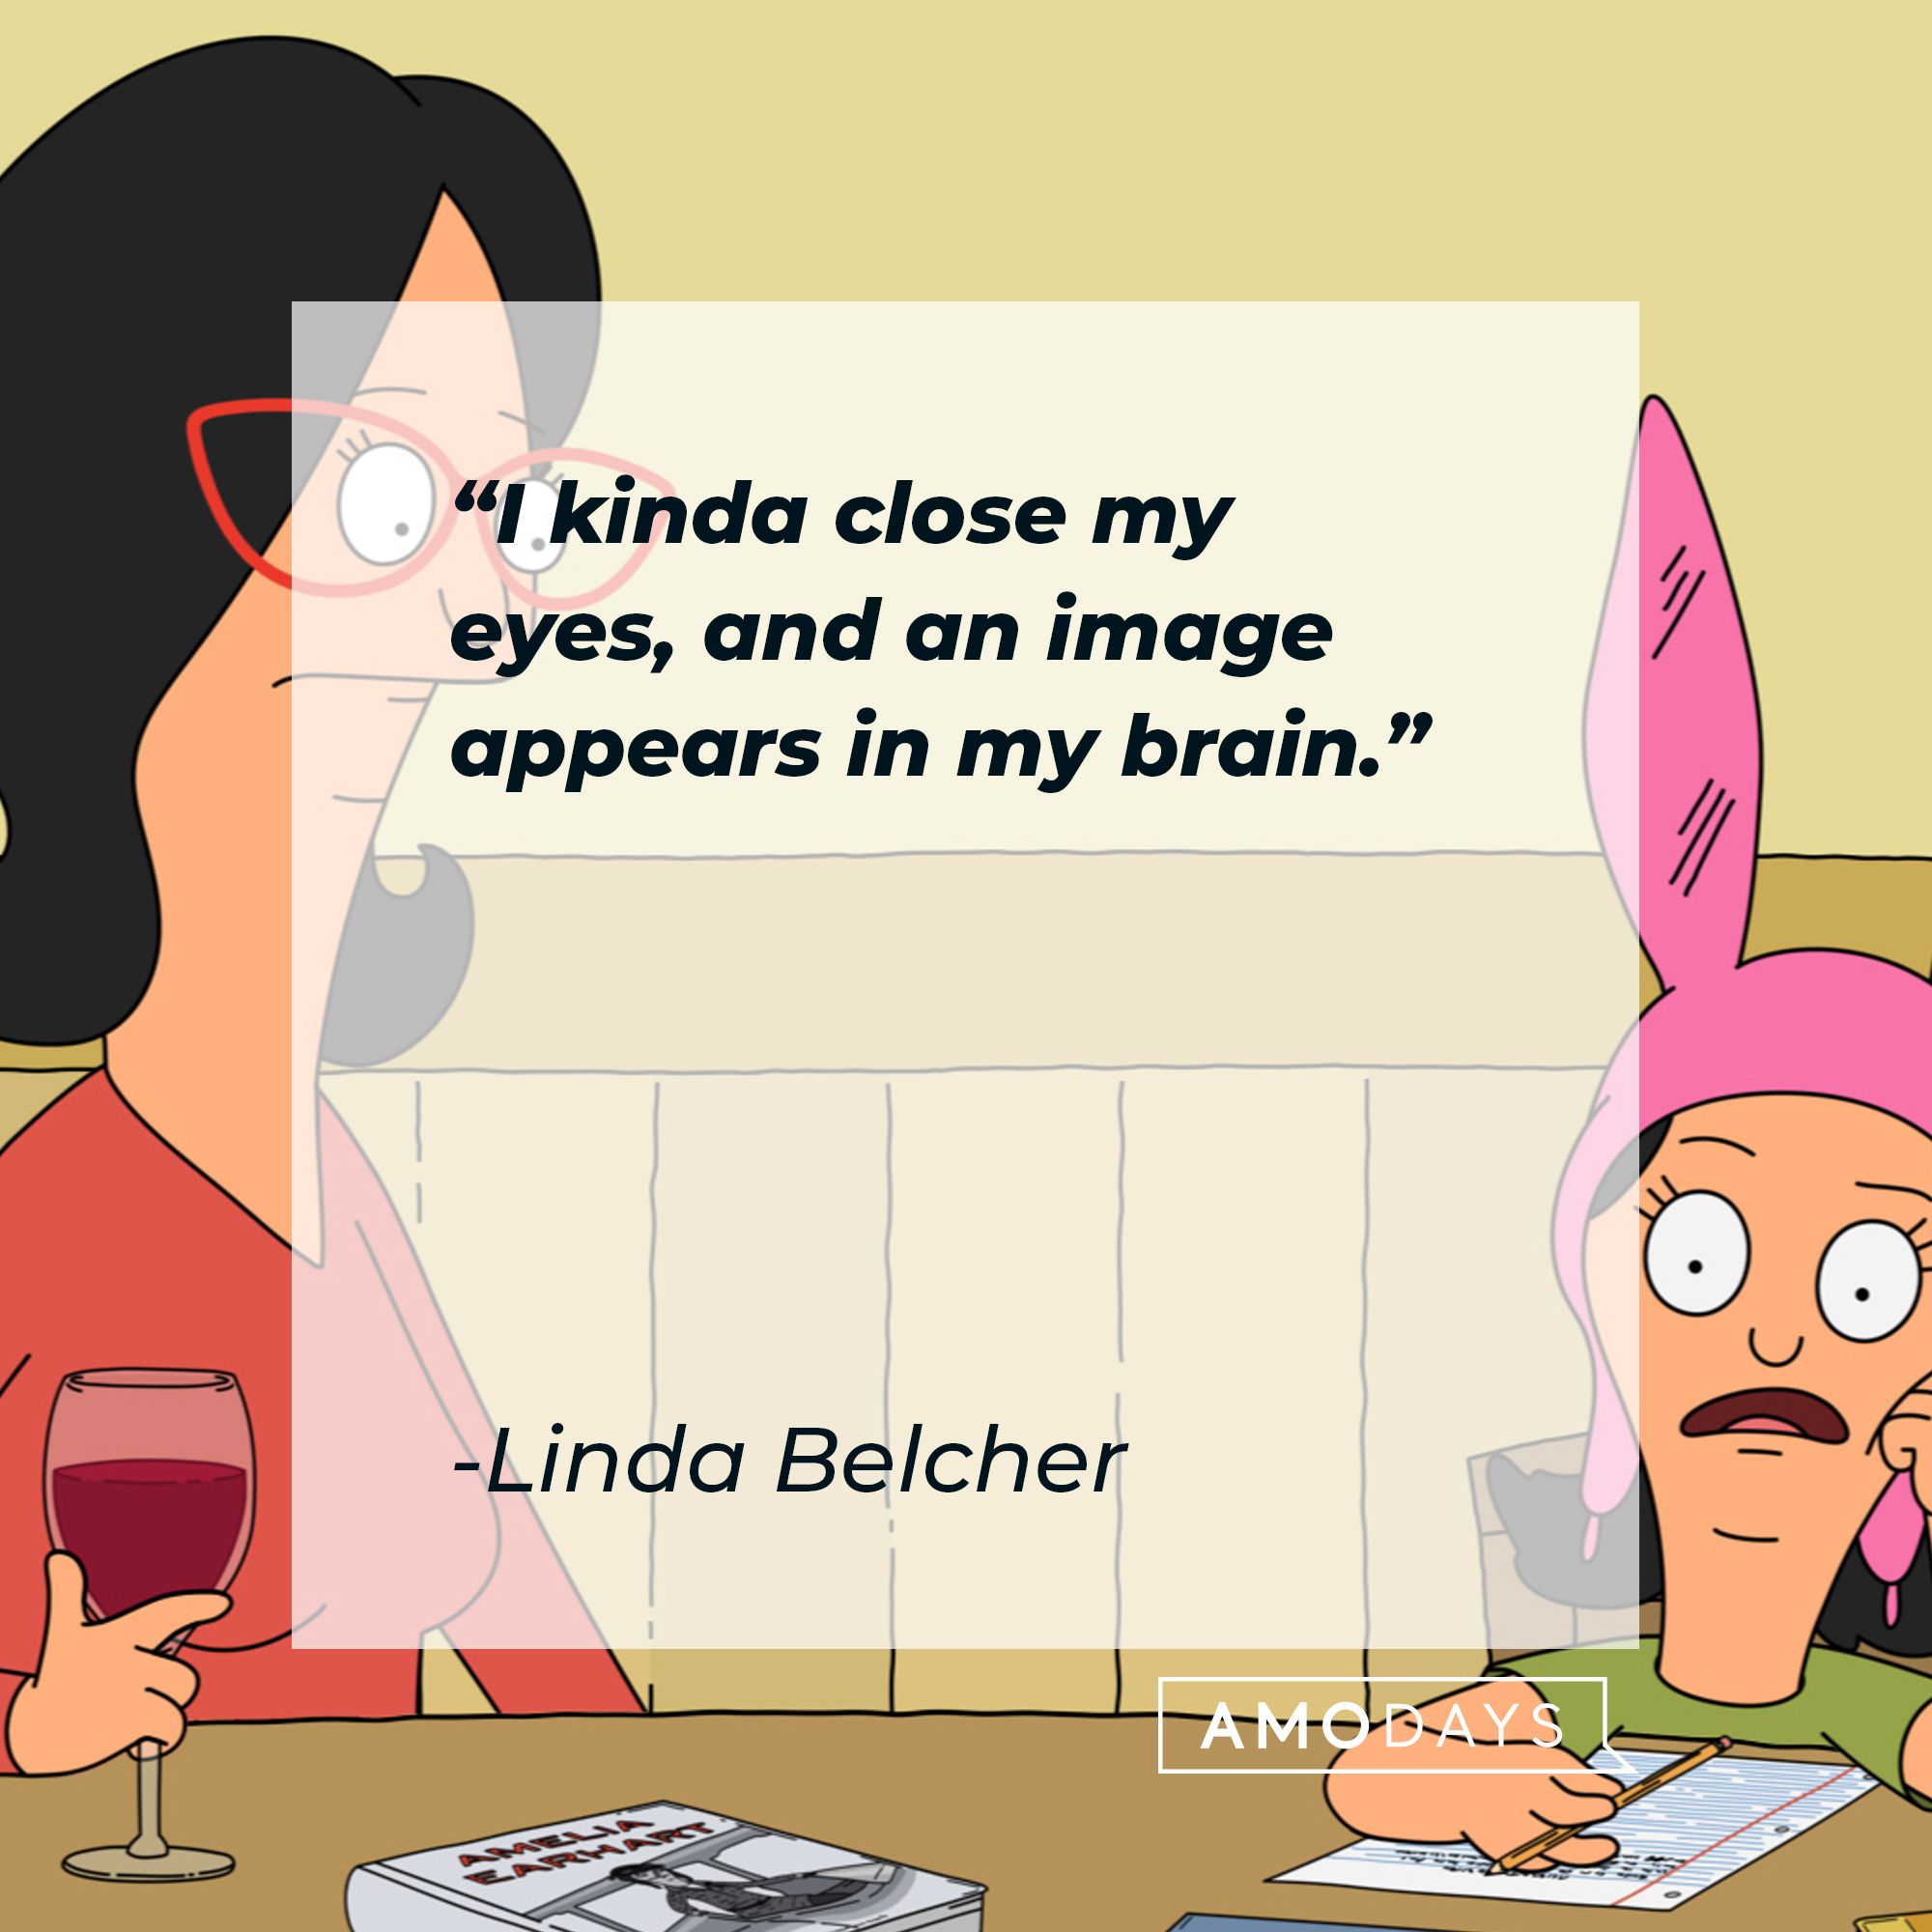 Linda Belcher's quote:"I kinda close my eyes, and an image appears in my brain." | Source: facebook.com/BobsBurgers